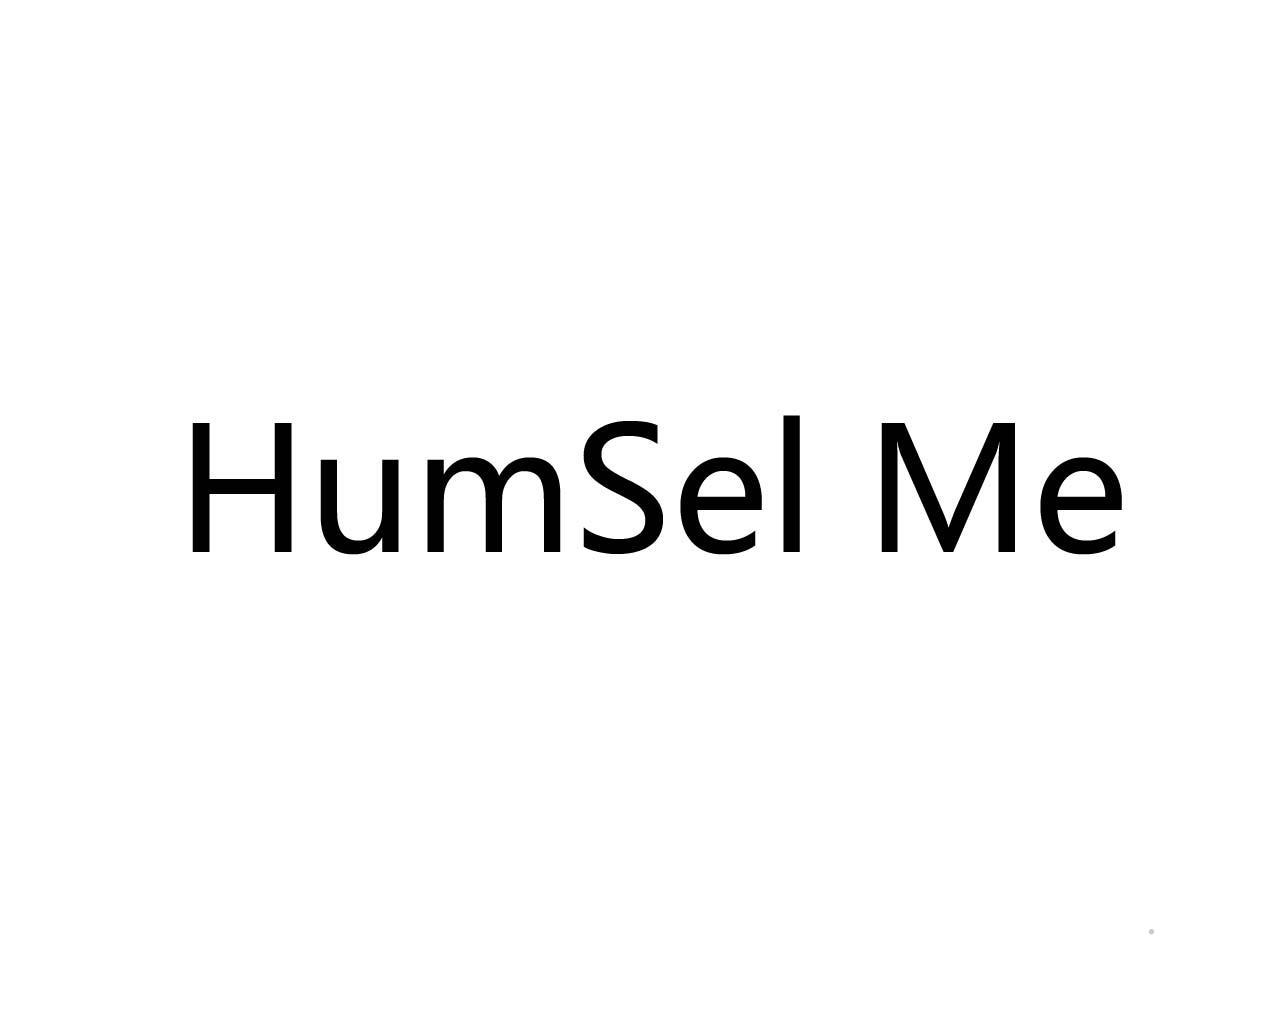 HUMSEL MElogo